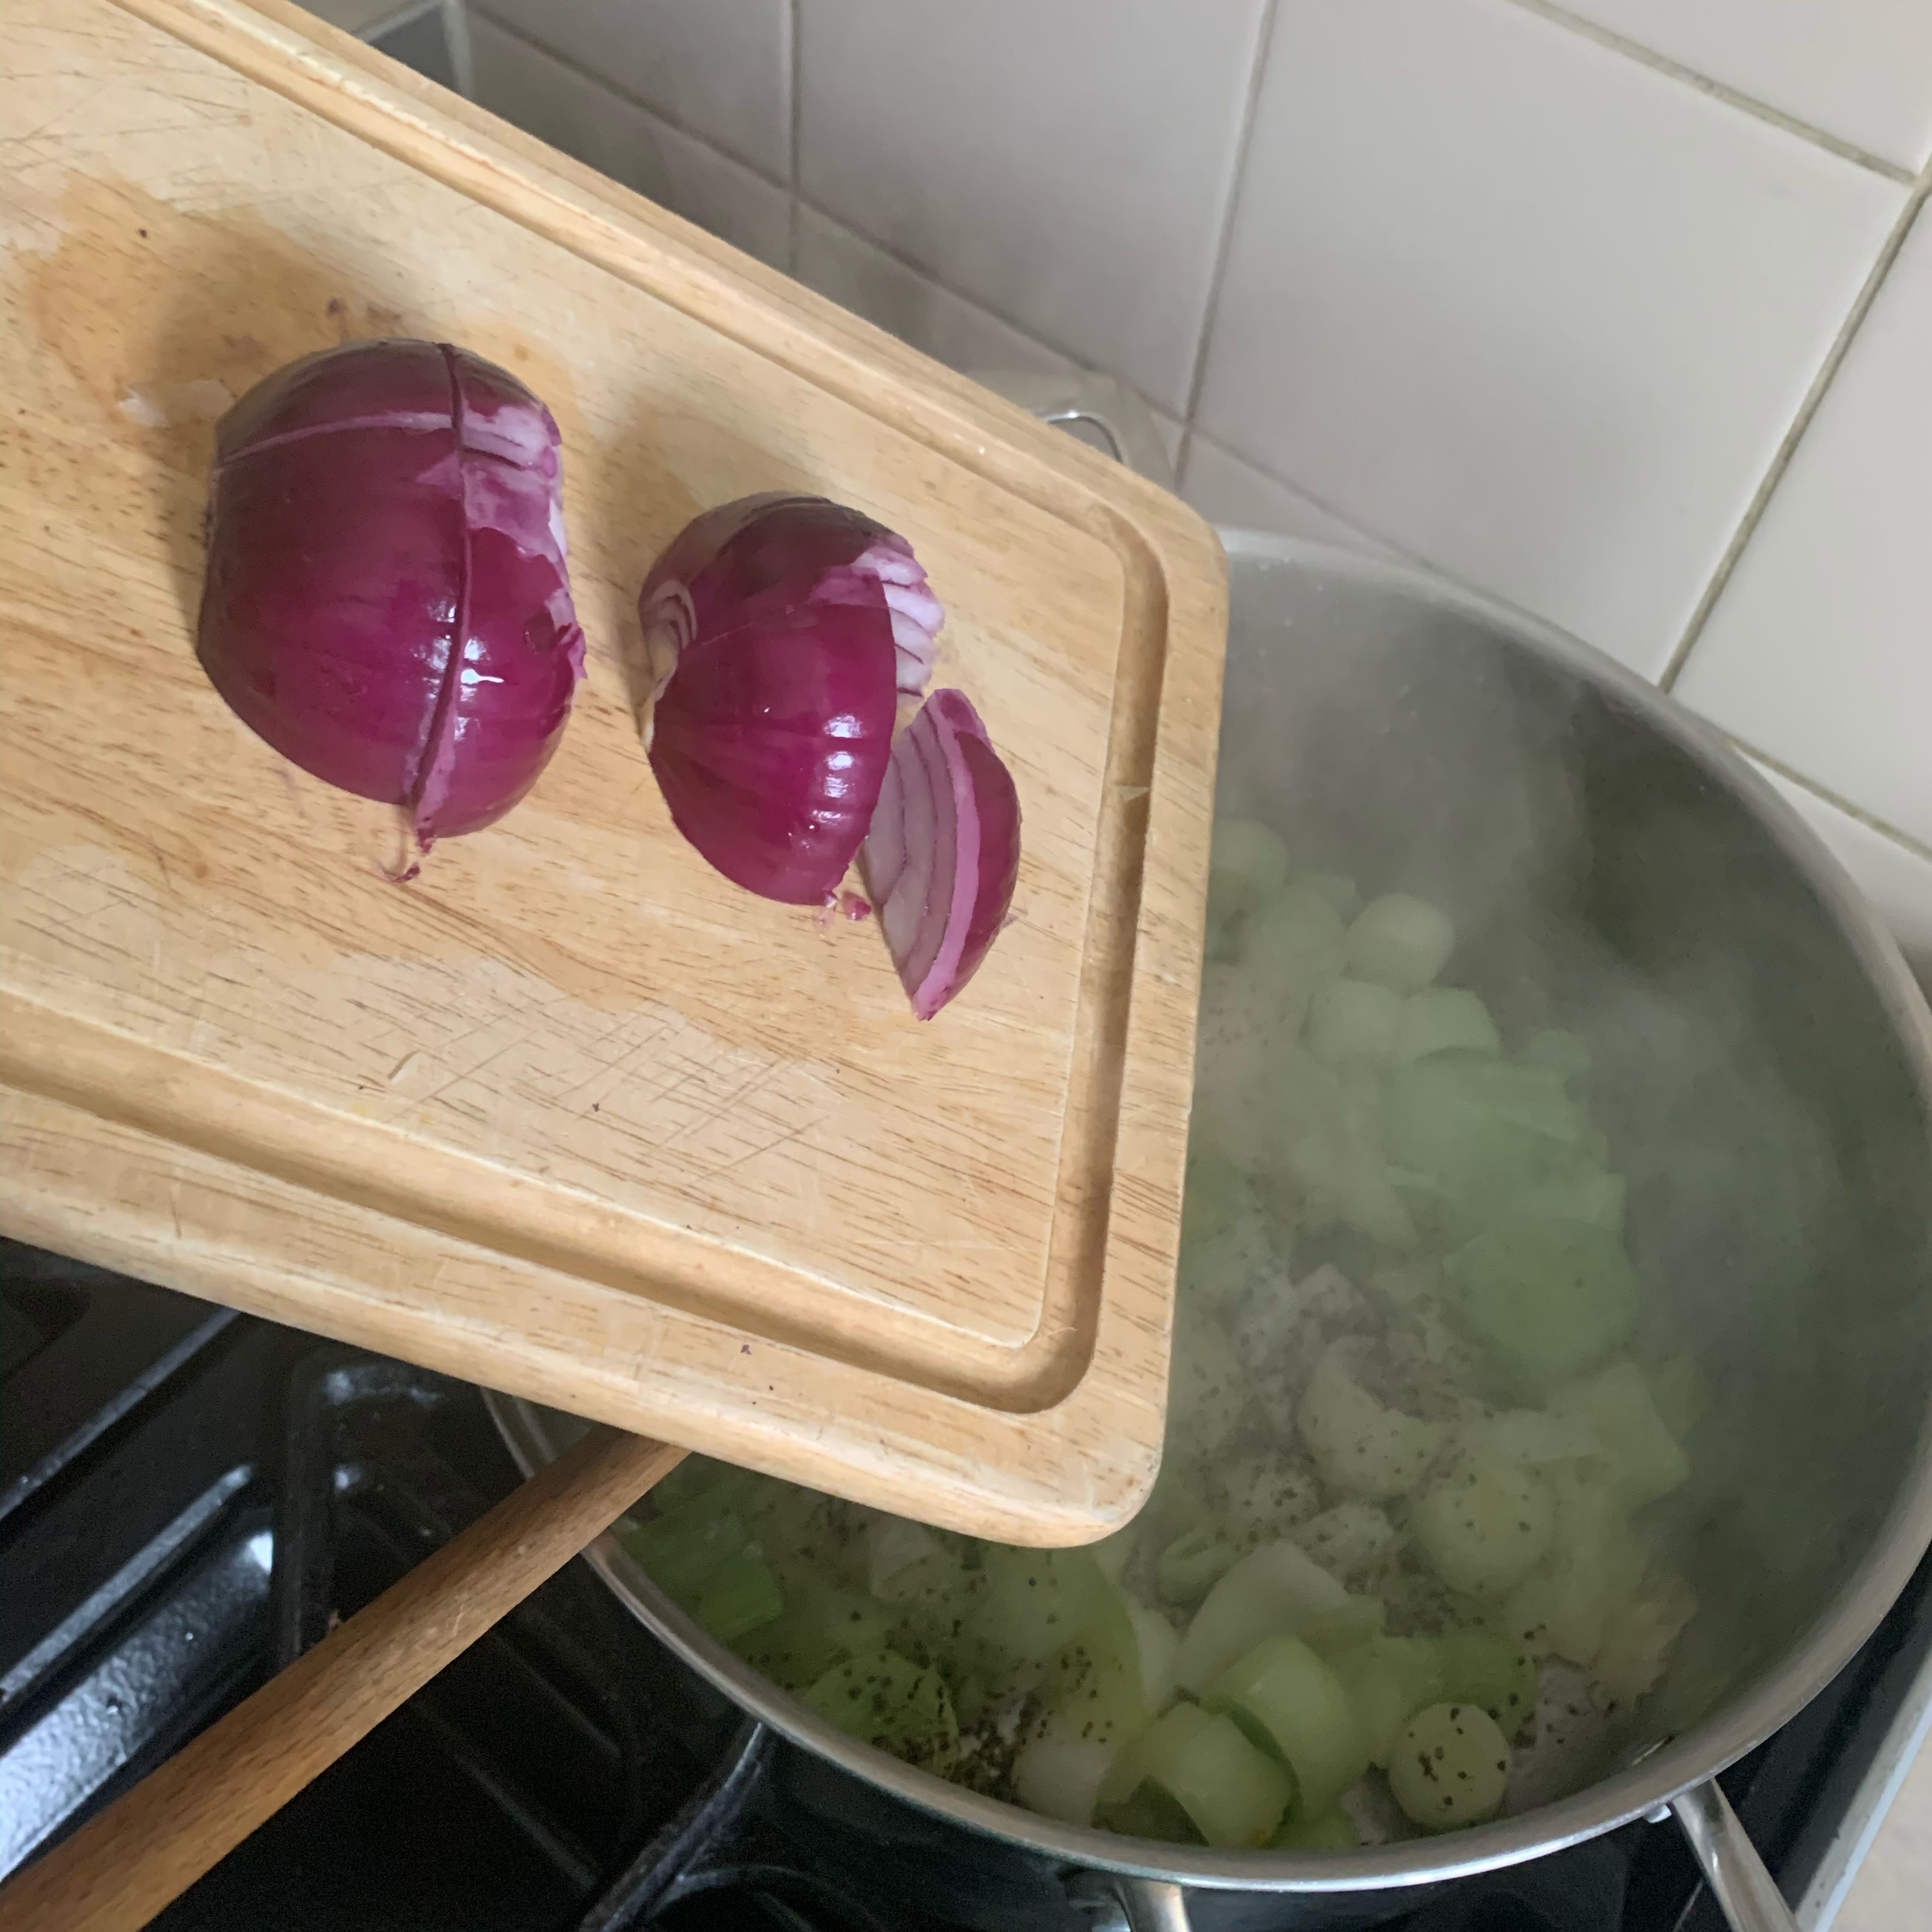 Peel, chop and add the red onion to the leek